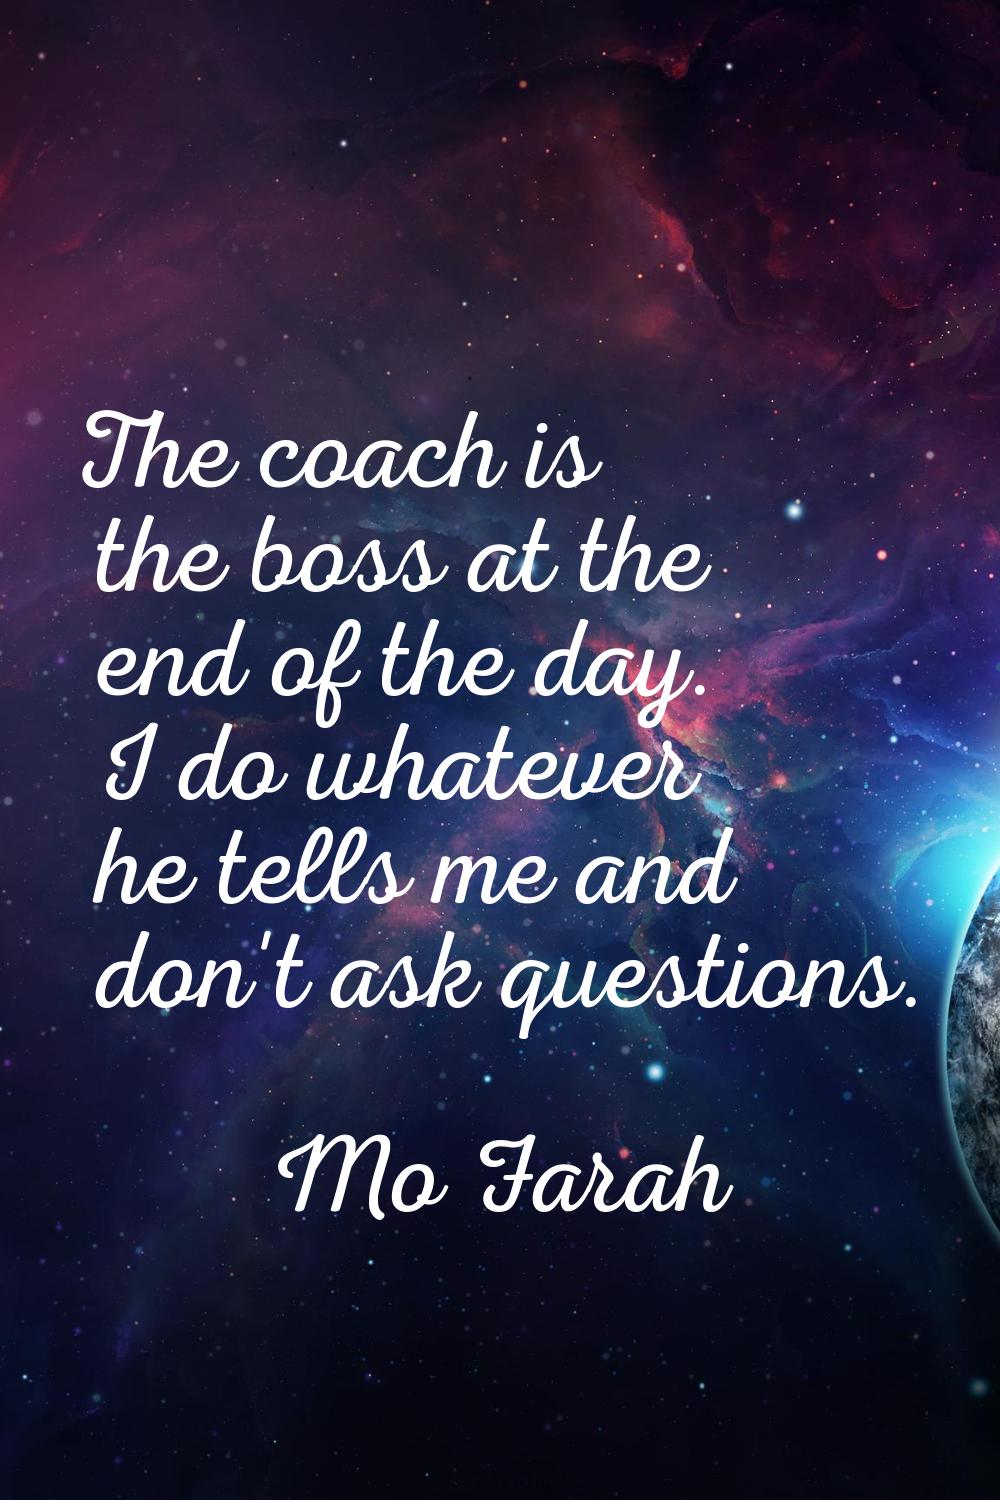 The coach is the boss at the end of the day. I do whatever he tells me and don't ask questions.